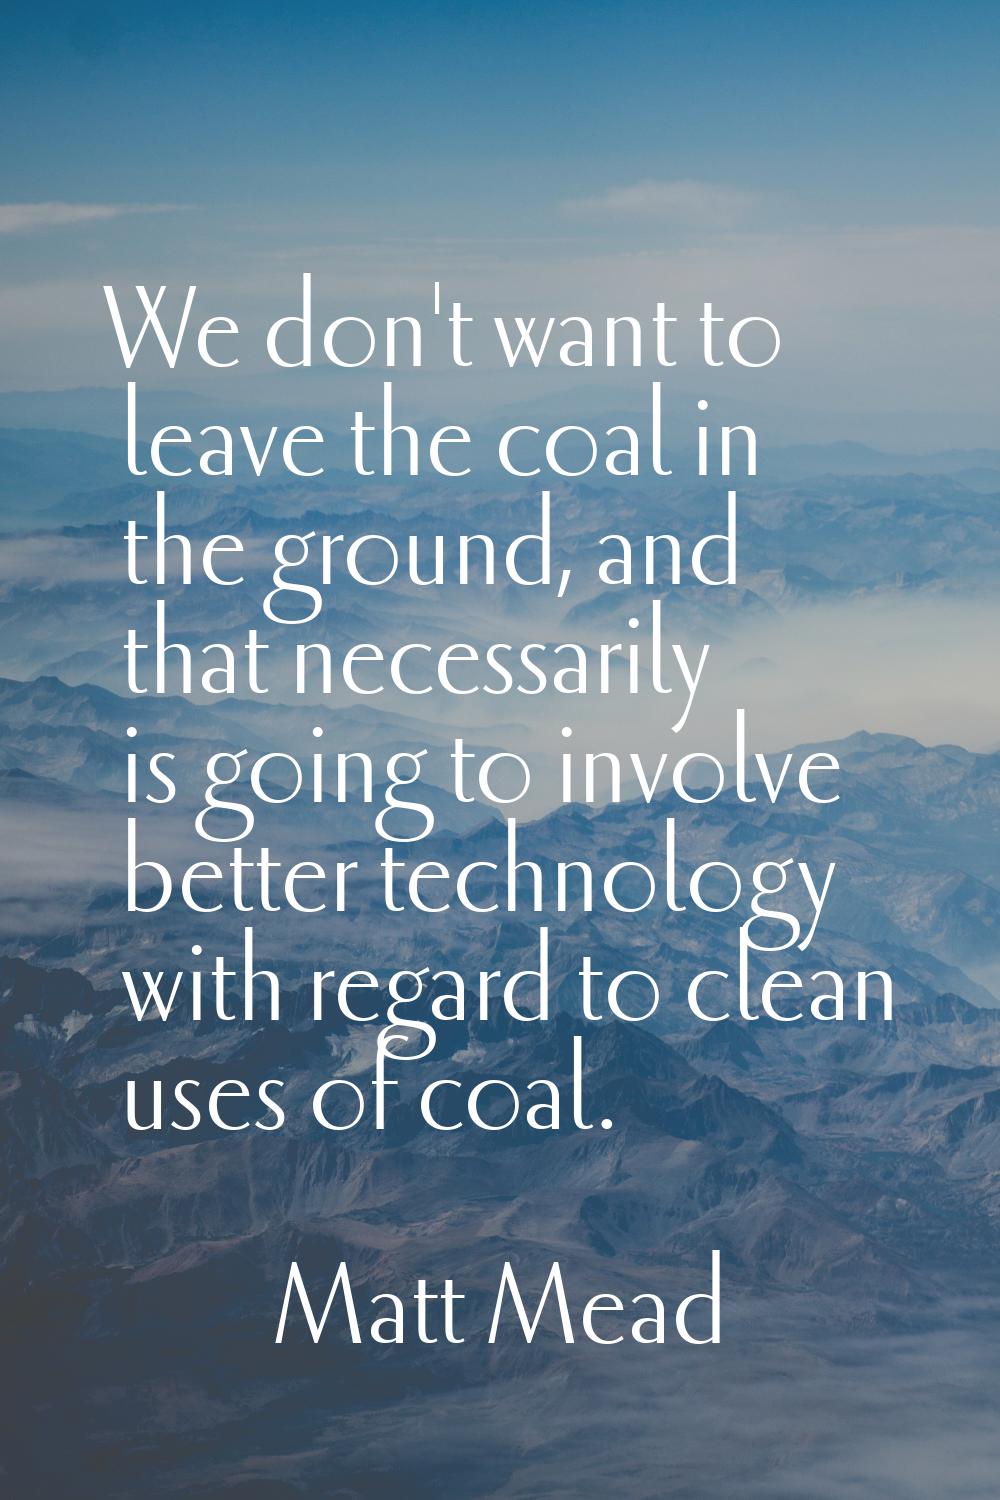 We don't want to leave the coal in the ground, and that necessarily is going to involve better tech